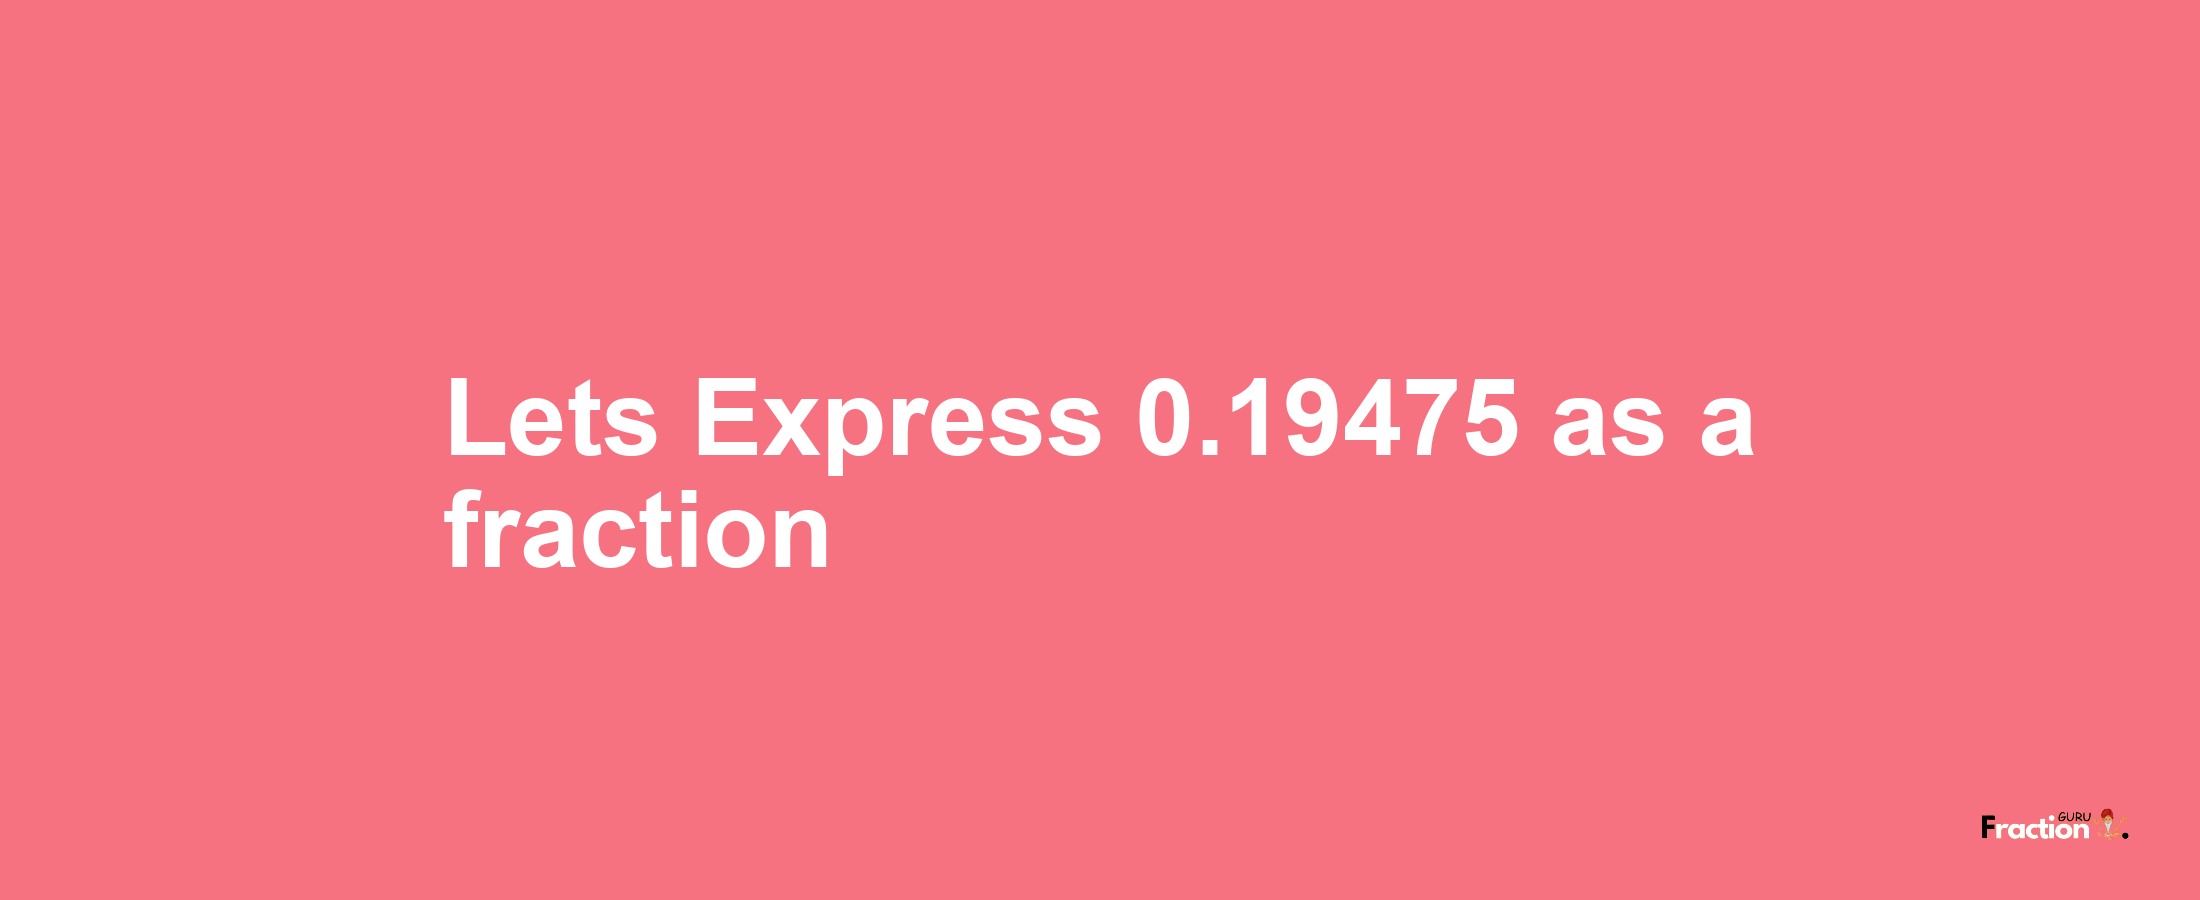 Lets Express 0.19475 as afraction